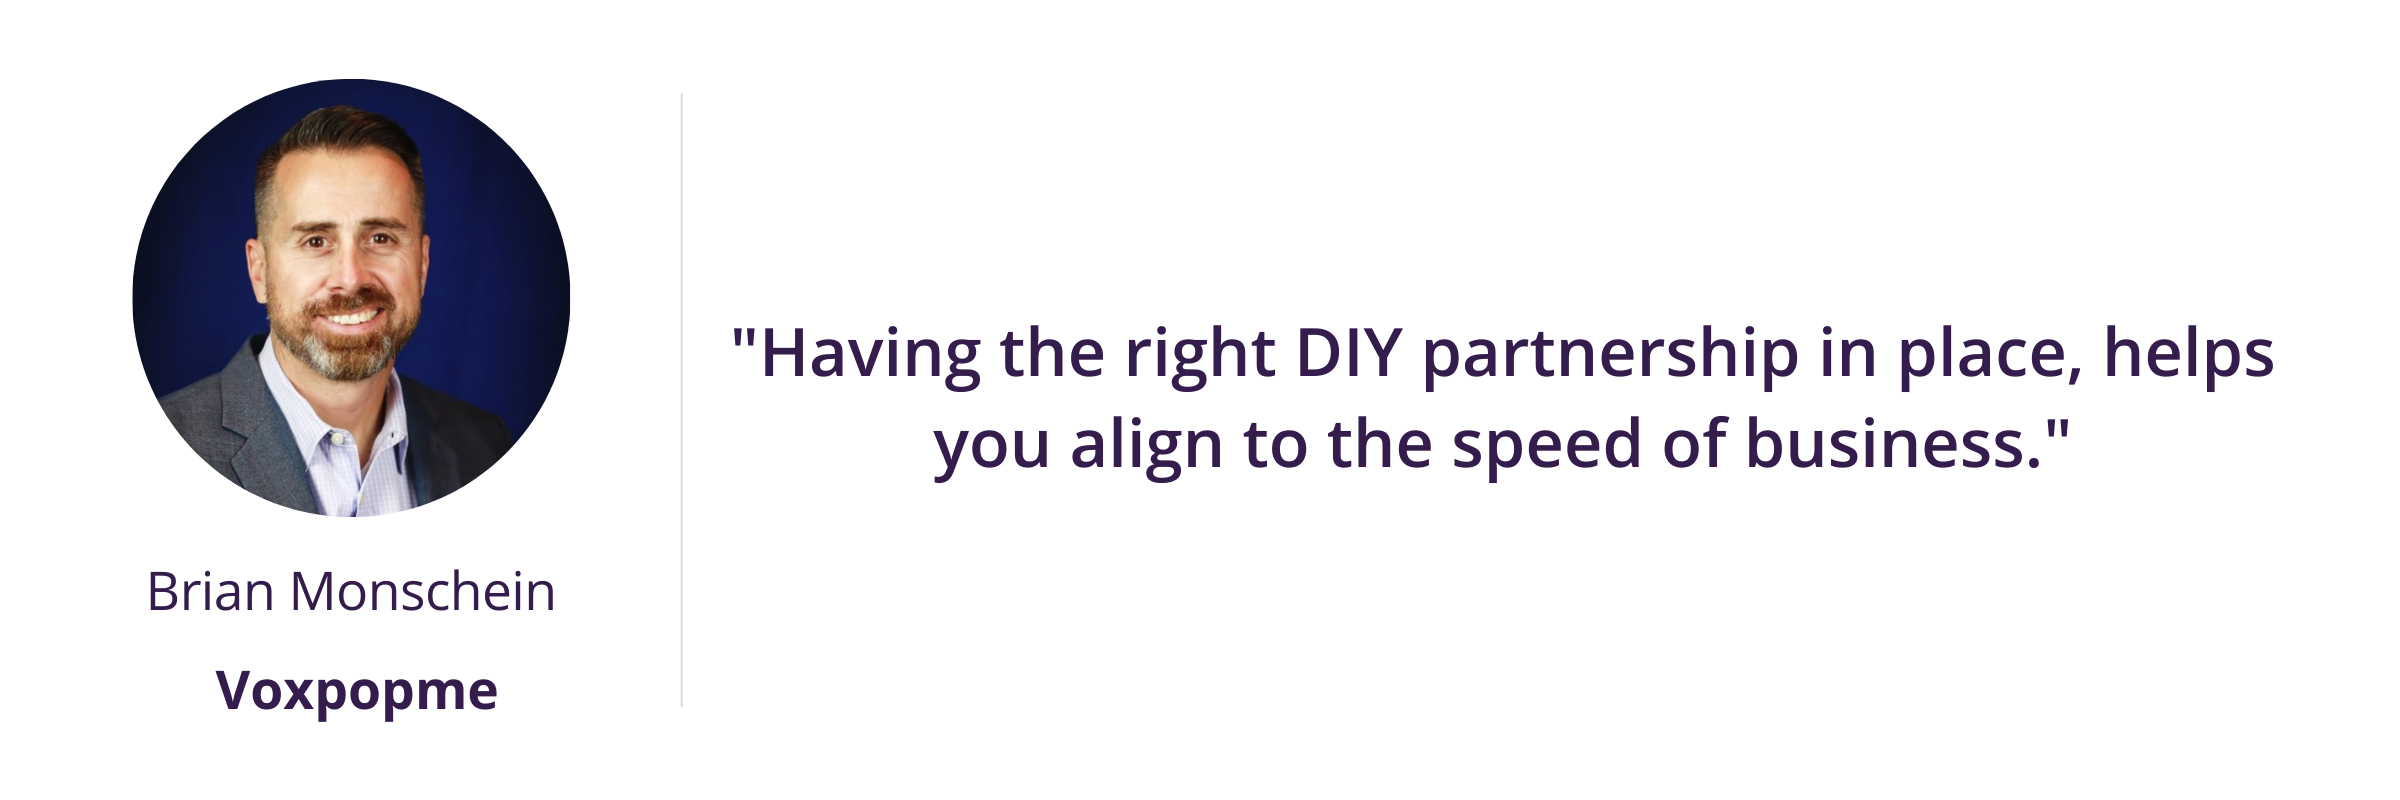 Having the right DIY partnership in place, helps you align to the speed of business.